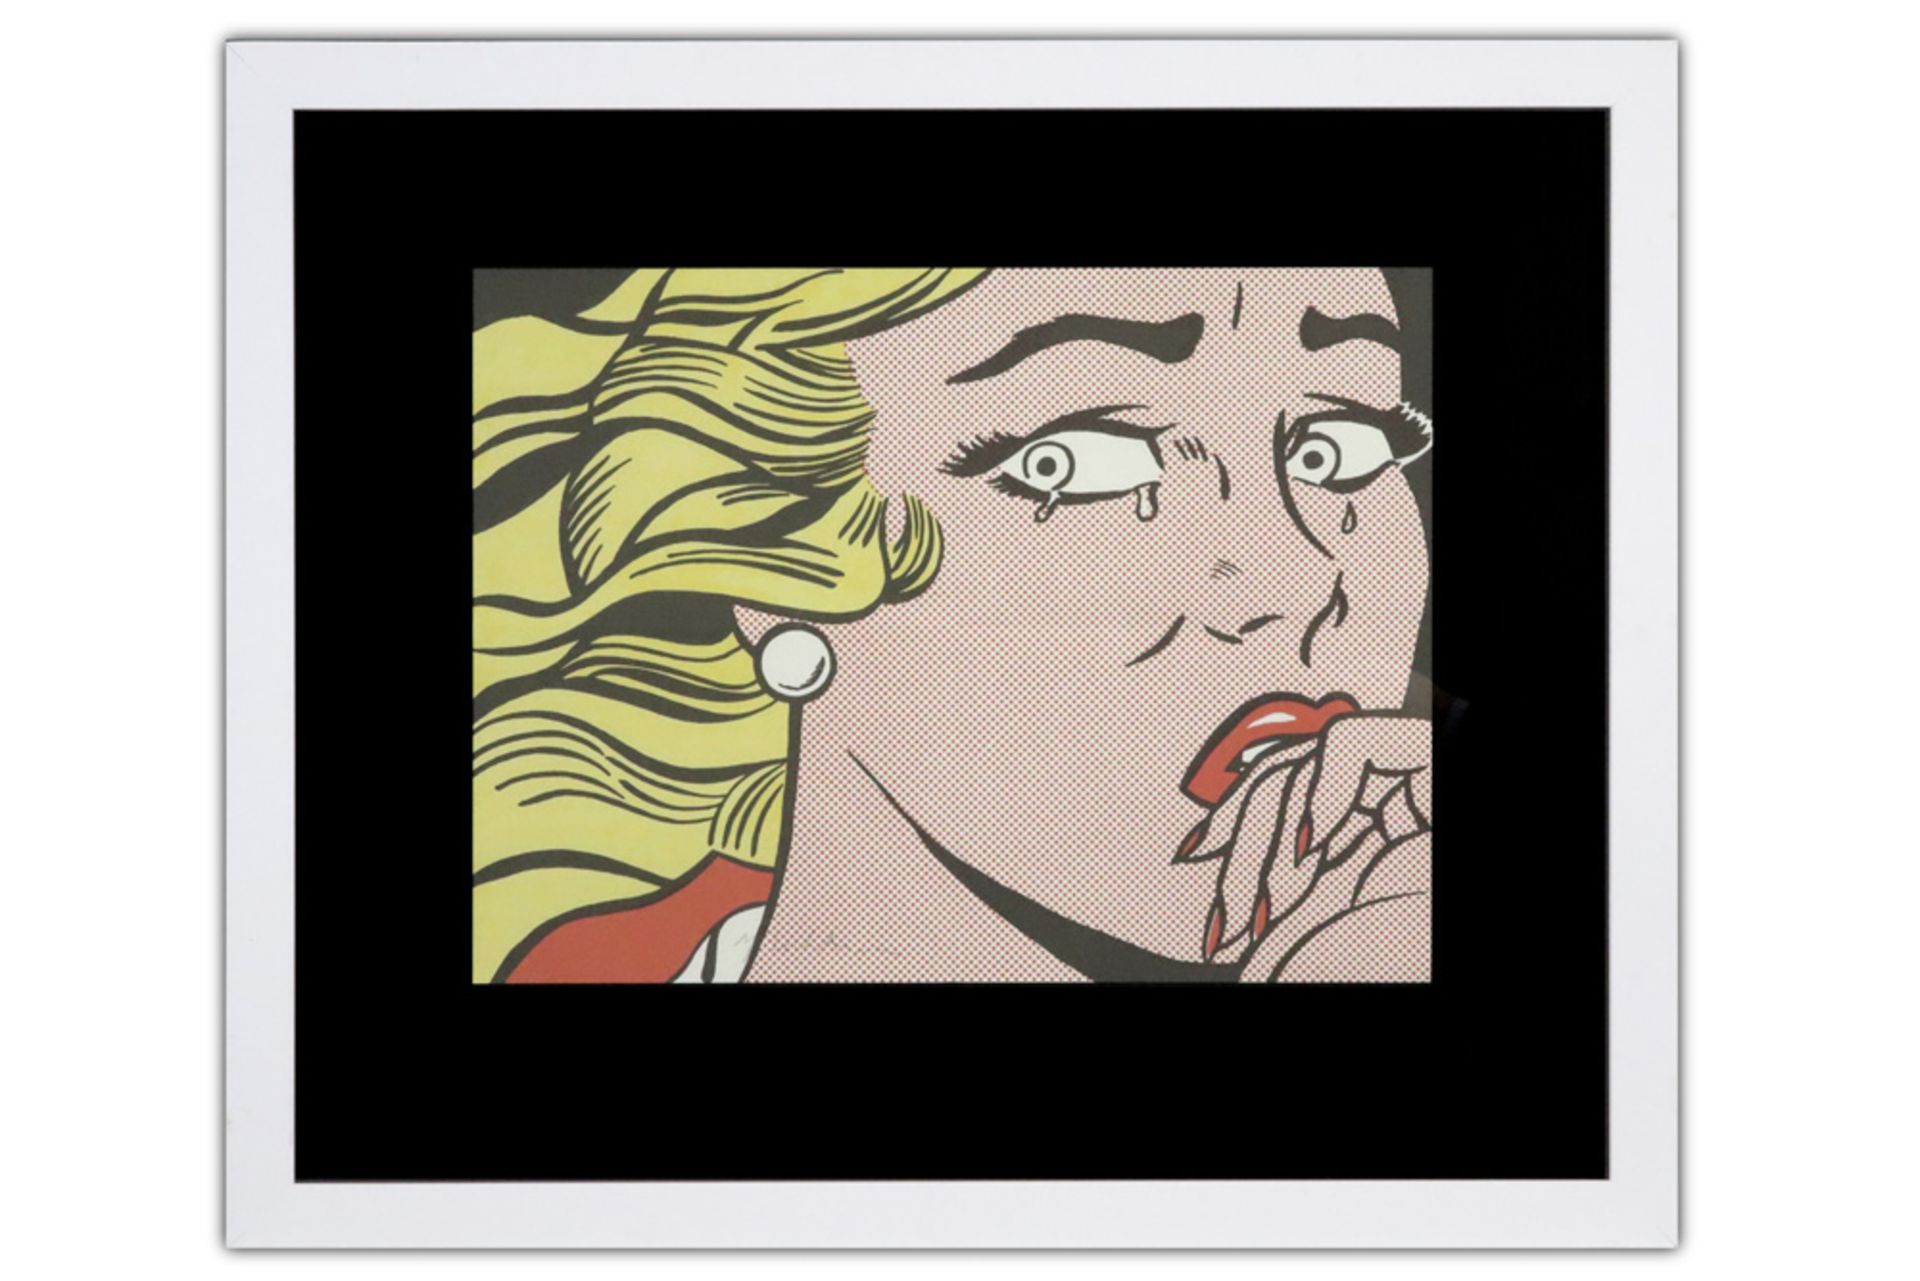 Roy Lichtenstein handsigned "Crying Girl" print in colors used as an invitation to the exhibition at - Image 5 of 5